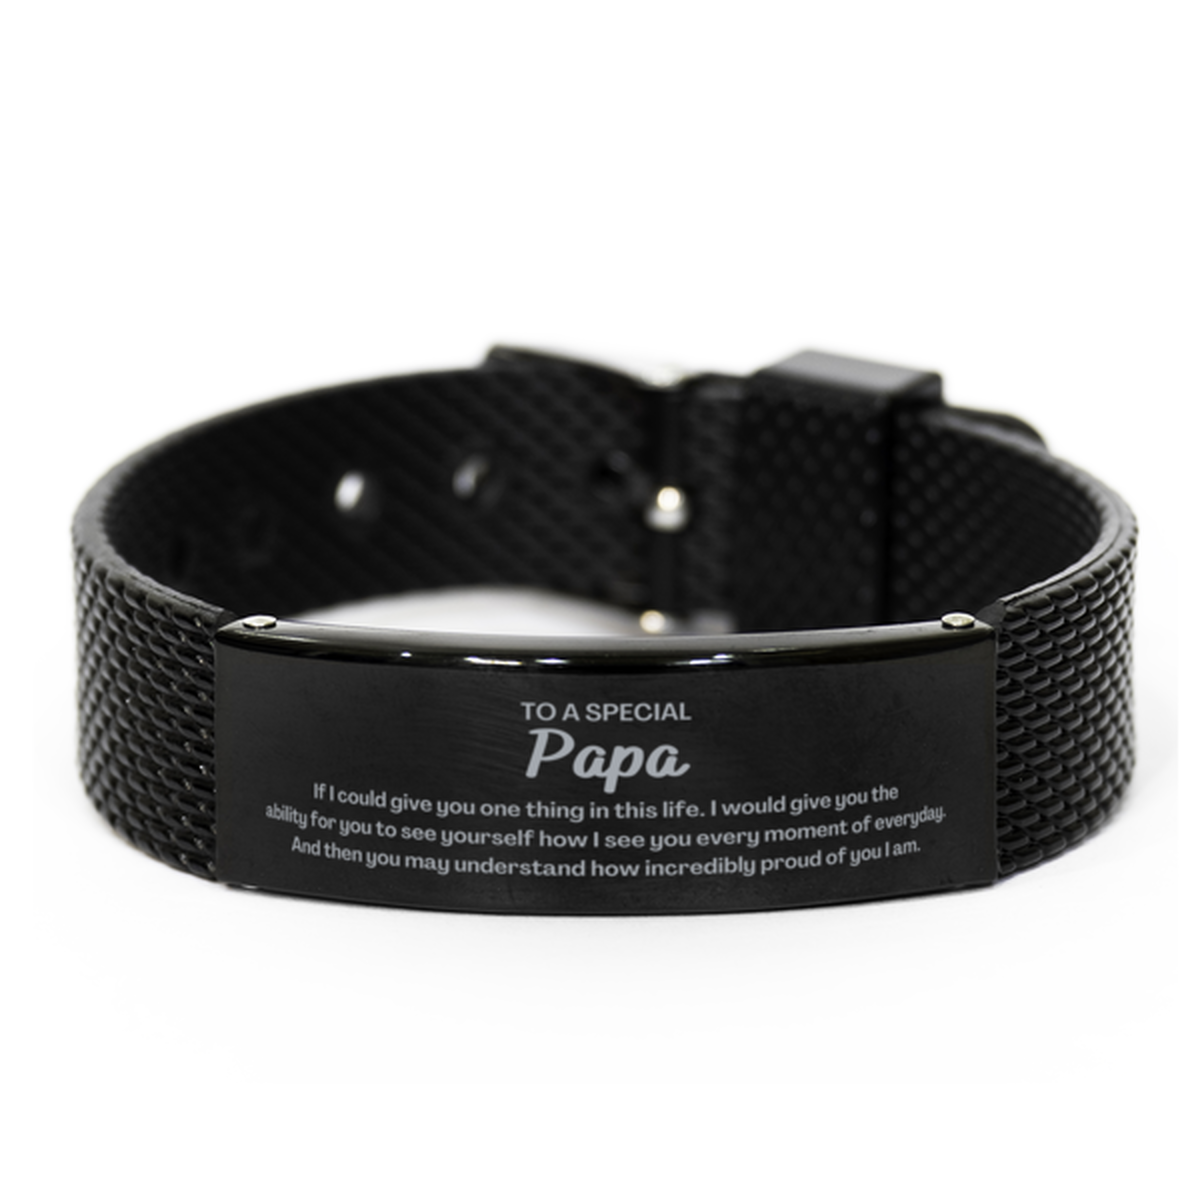 To My Papa Black Shark Mesh Bracelet, Gifts For Papa Engraved, Inspirational Gifts for Christmas Birthday, Epic Gifts for Papa To A Special Papa how incredibly proud of you I am